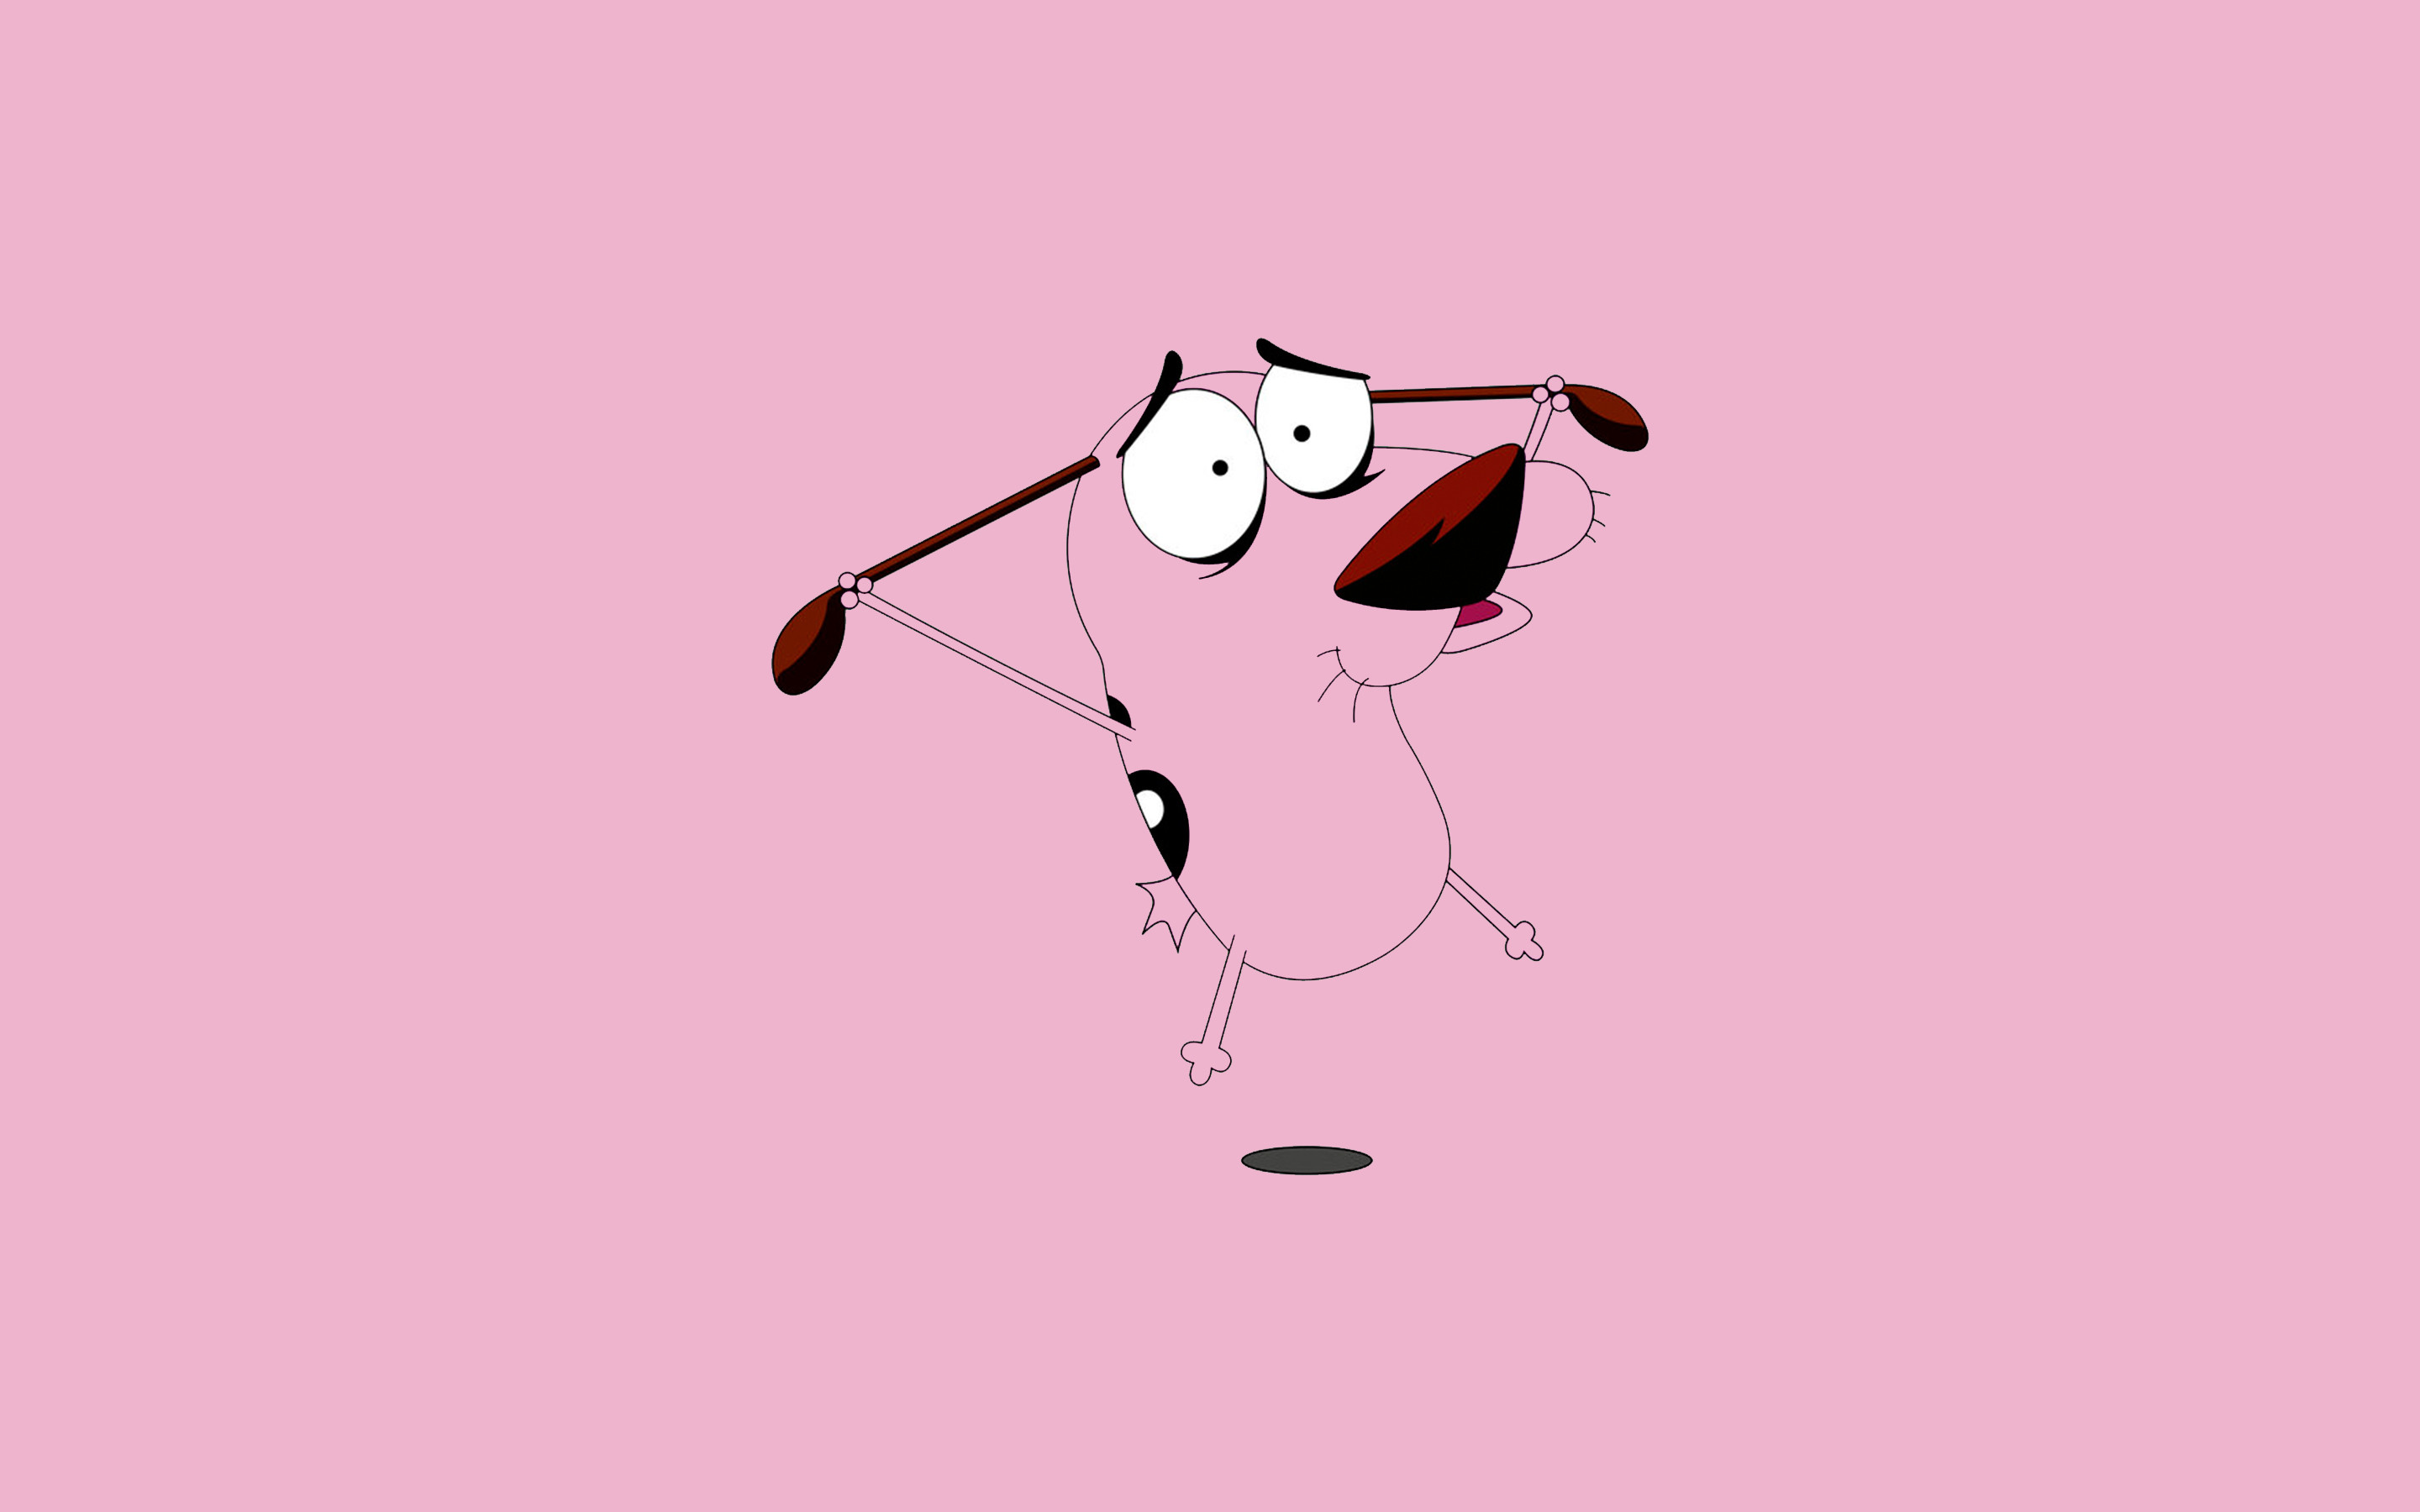 1 Courage the cowardly dog HD Wallpapers | Backgrounds – Wallpaper Abyss